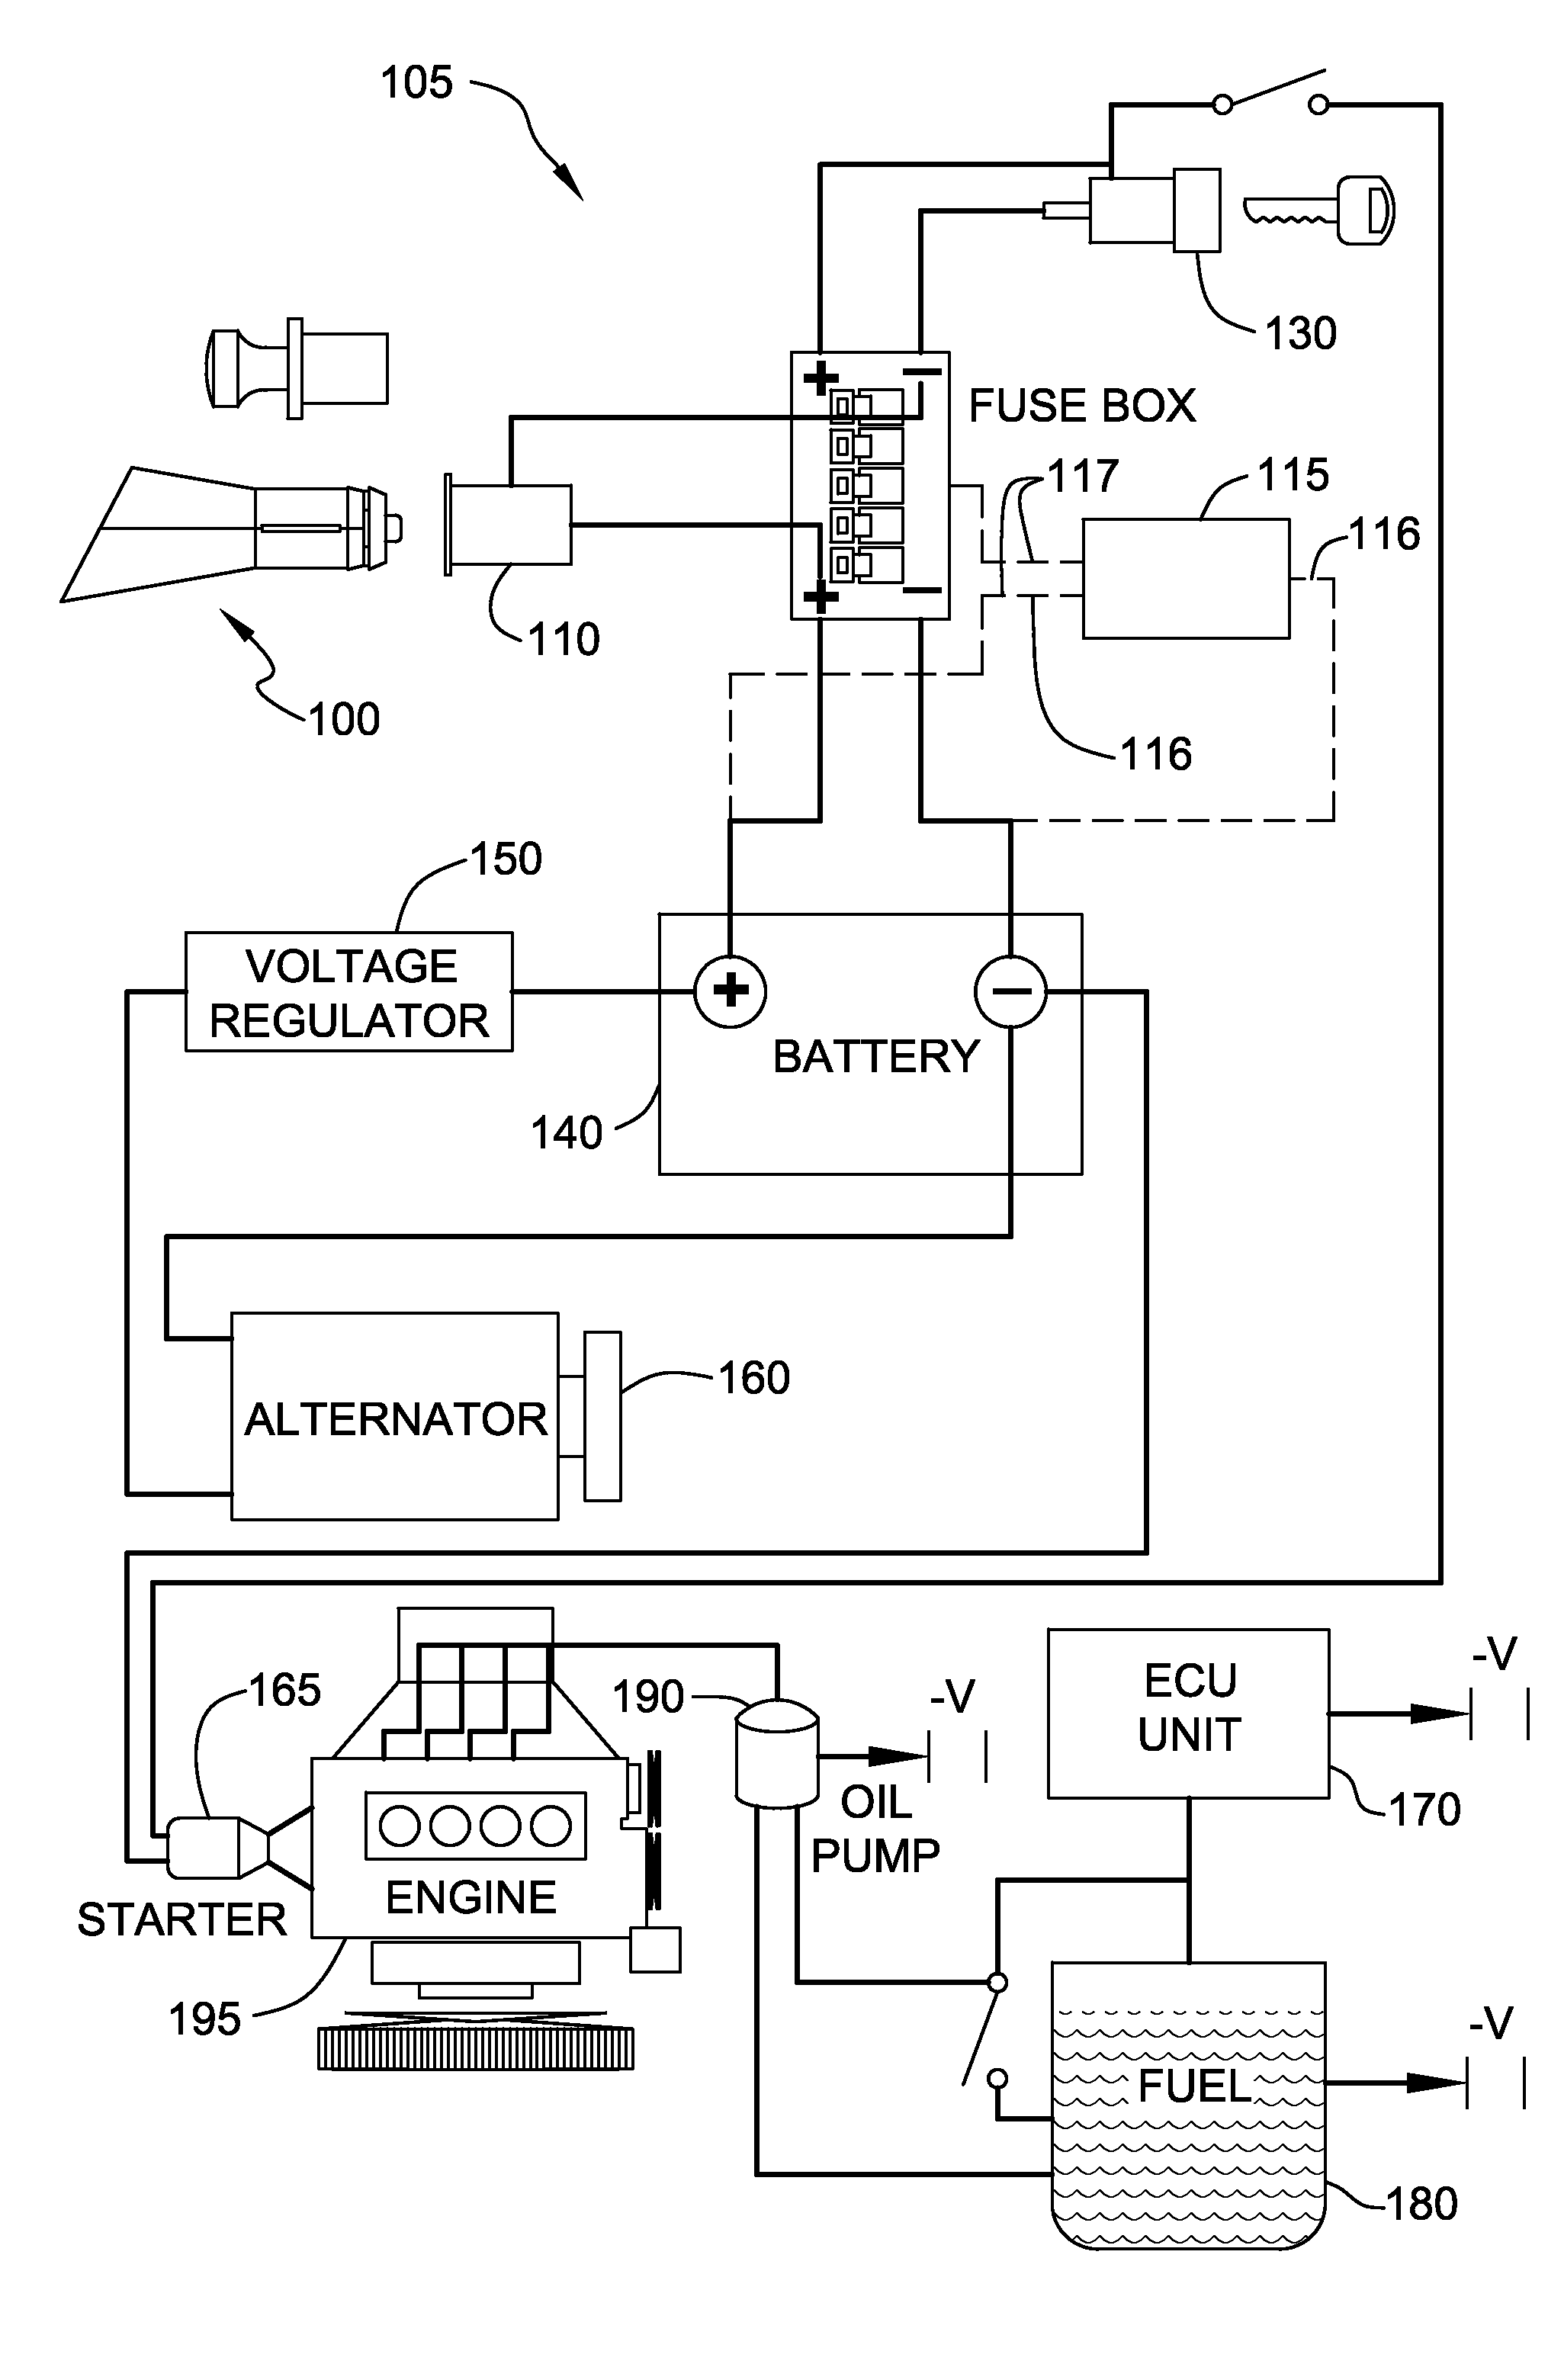 Fuell consumption reduction device